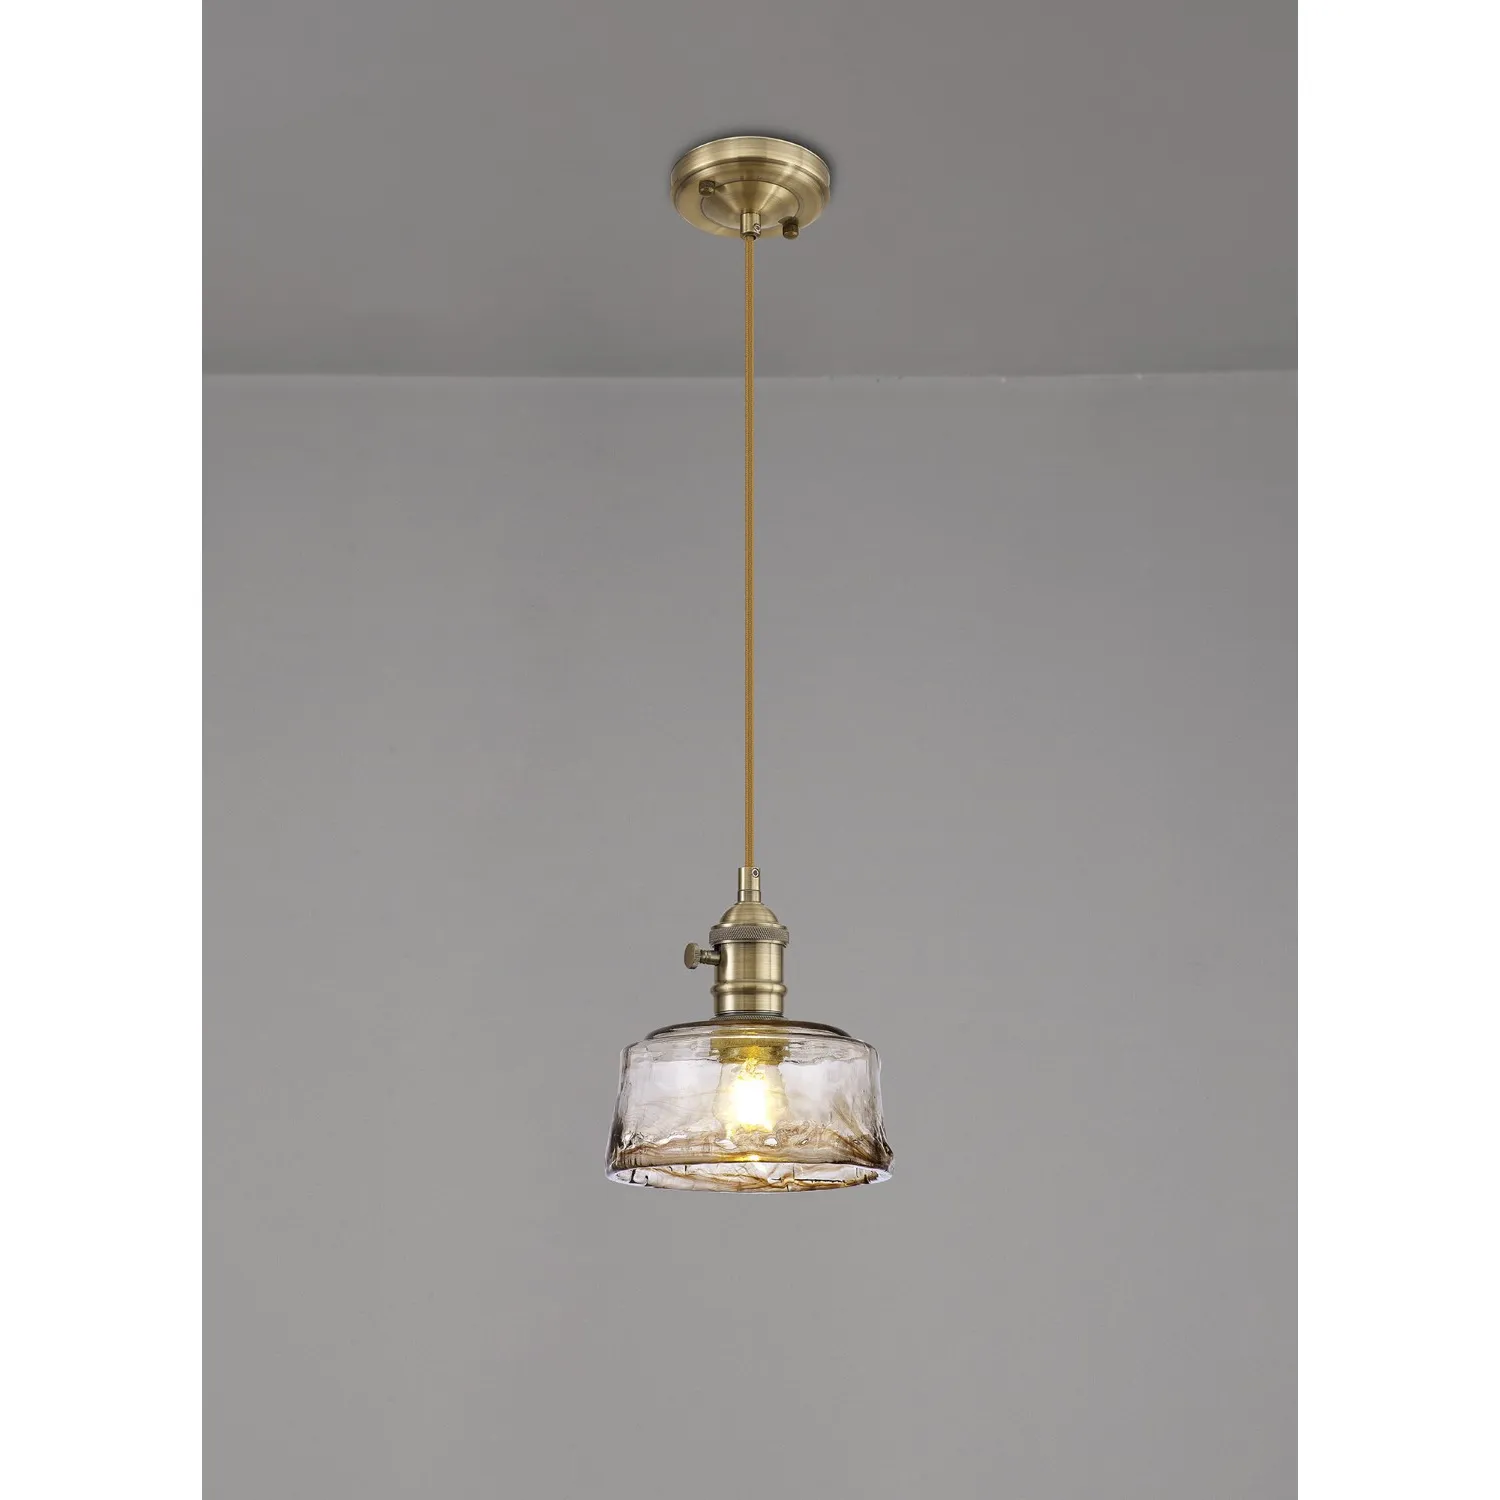 Hatfield Switched Pendant 1.5m, 1 x E27, Antique Brass Golden Brown Braided Cable Brown Bowl Glass